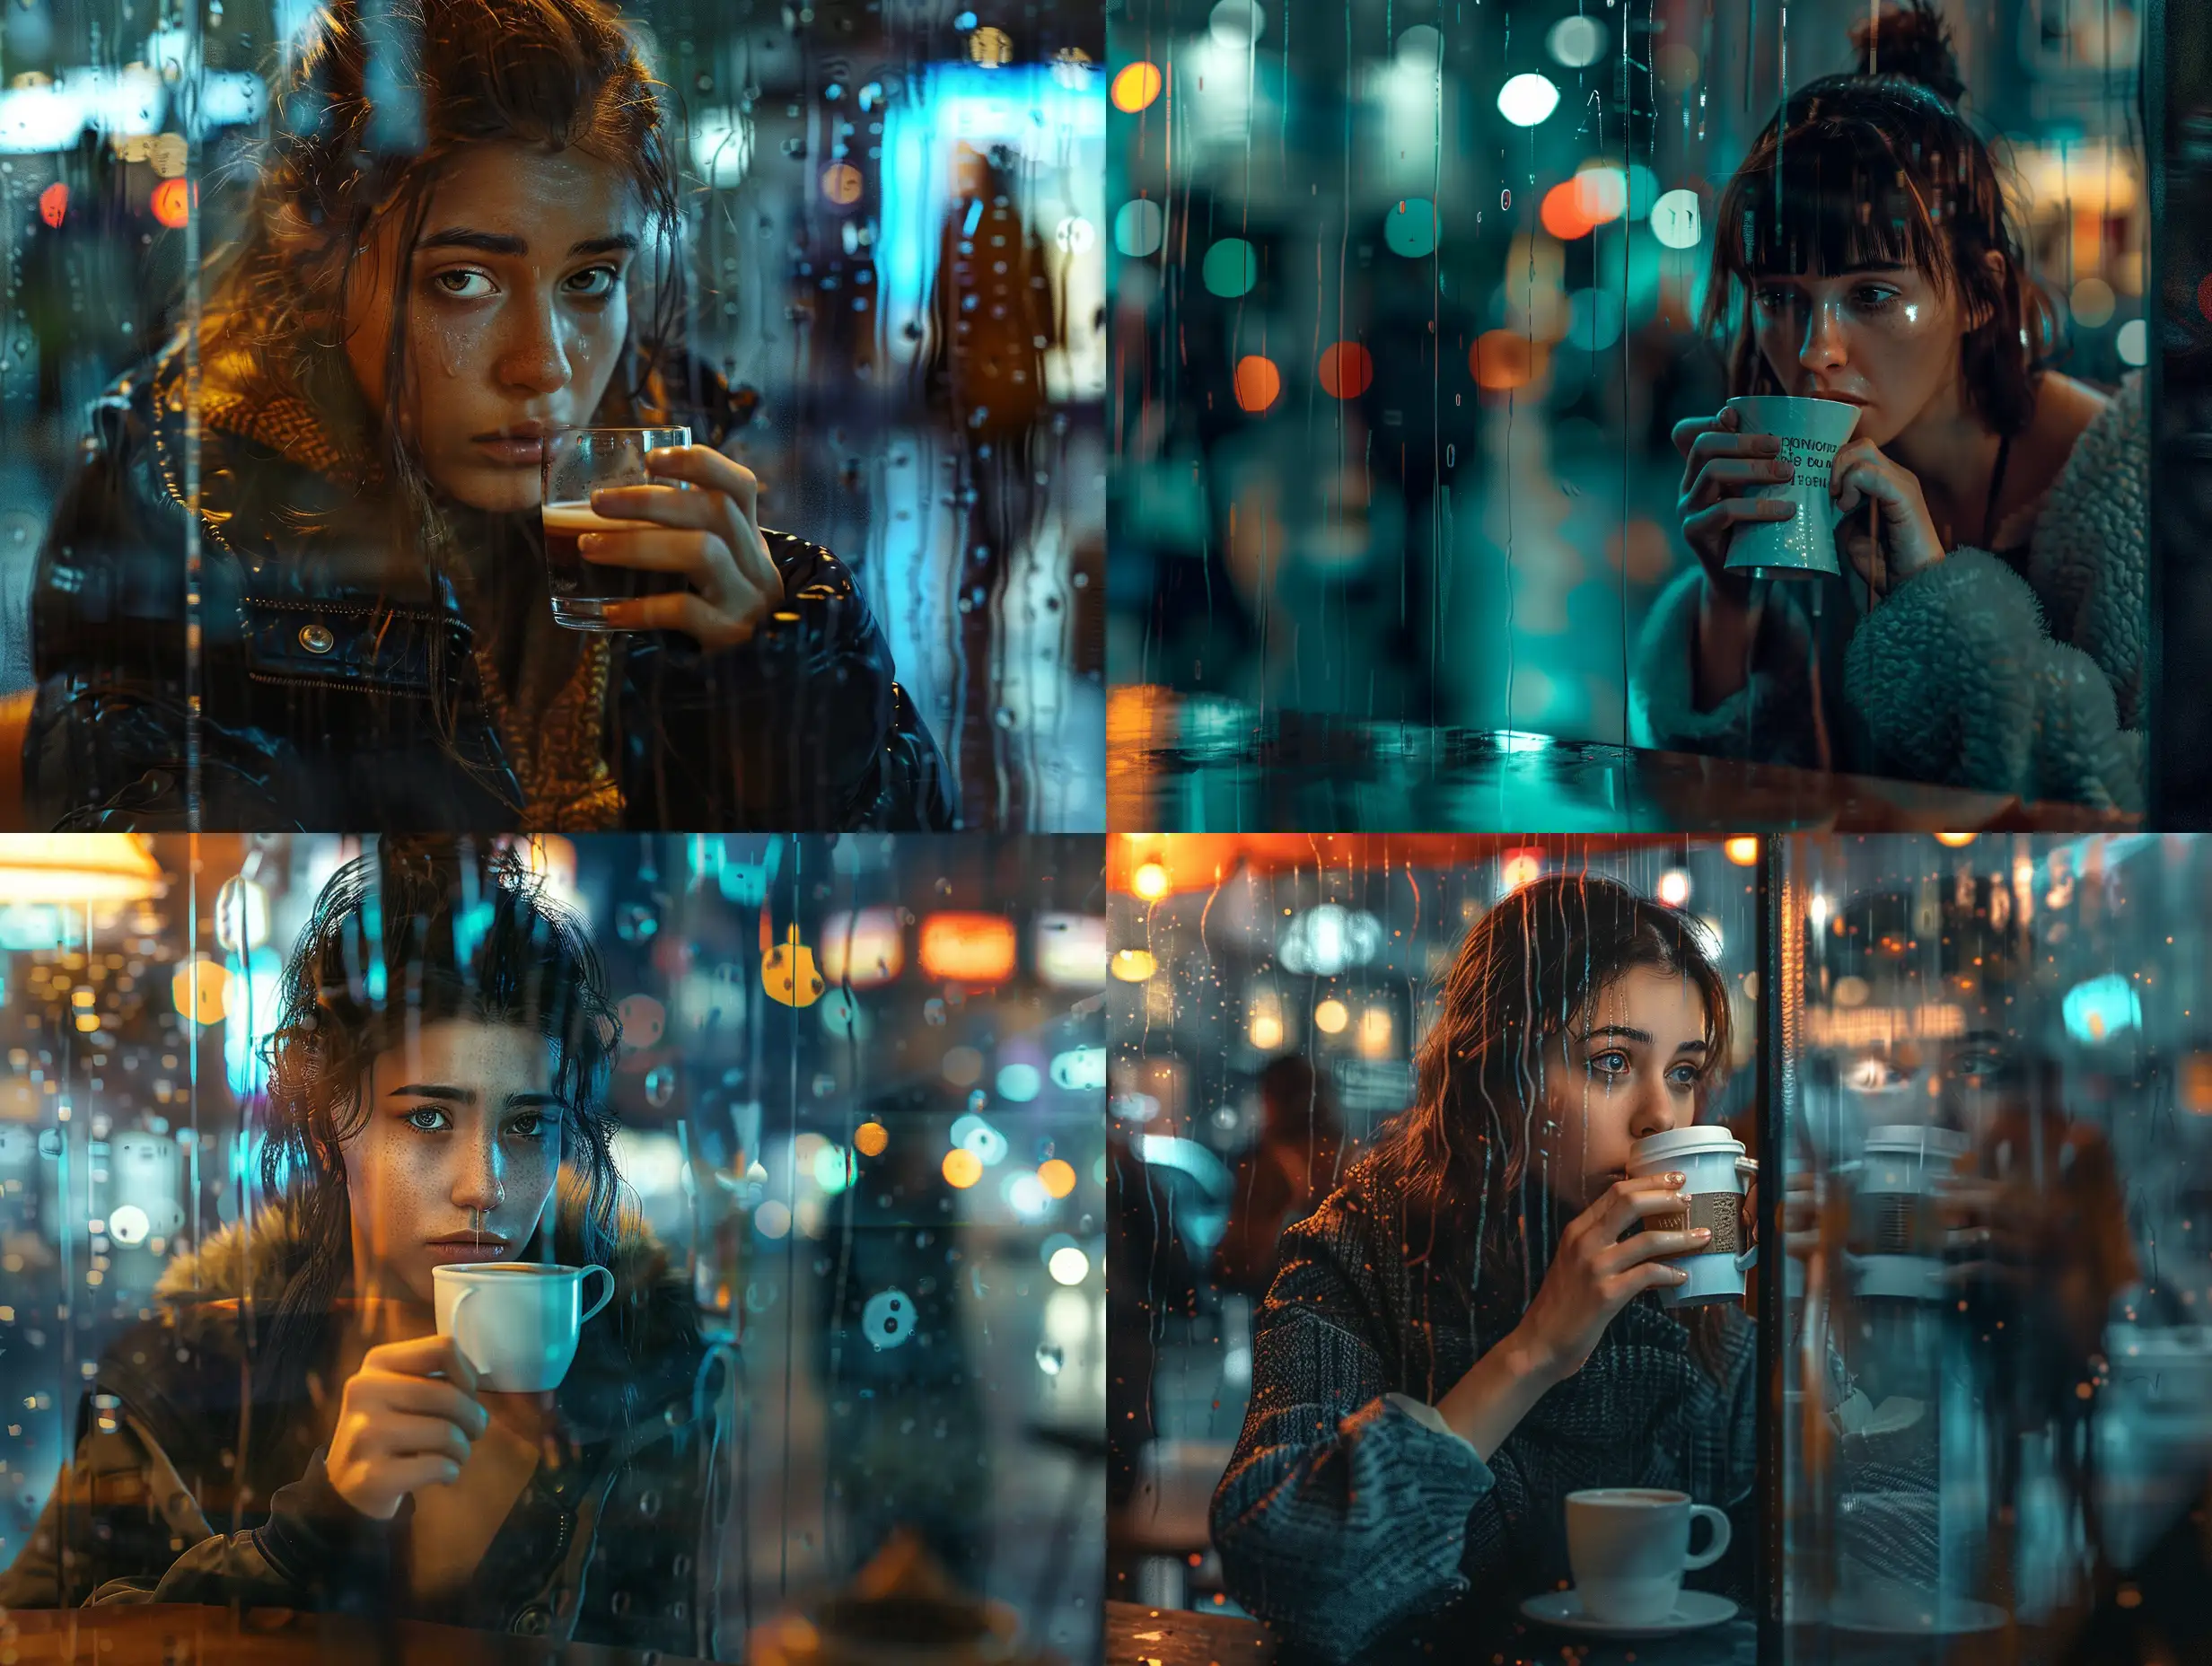 Lonely-Girl-Reflects-Over-Coffee-in-Rainy-Night-Cafe